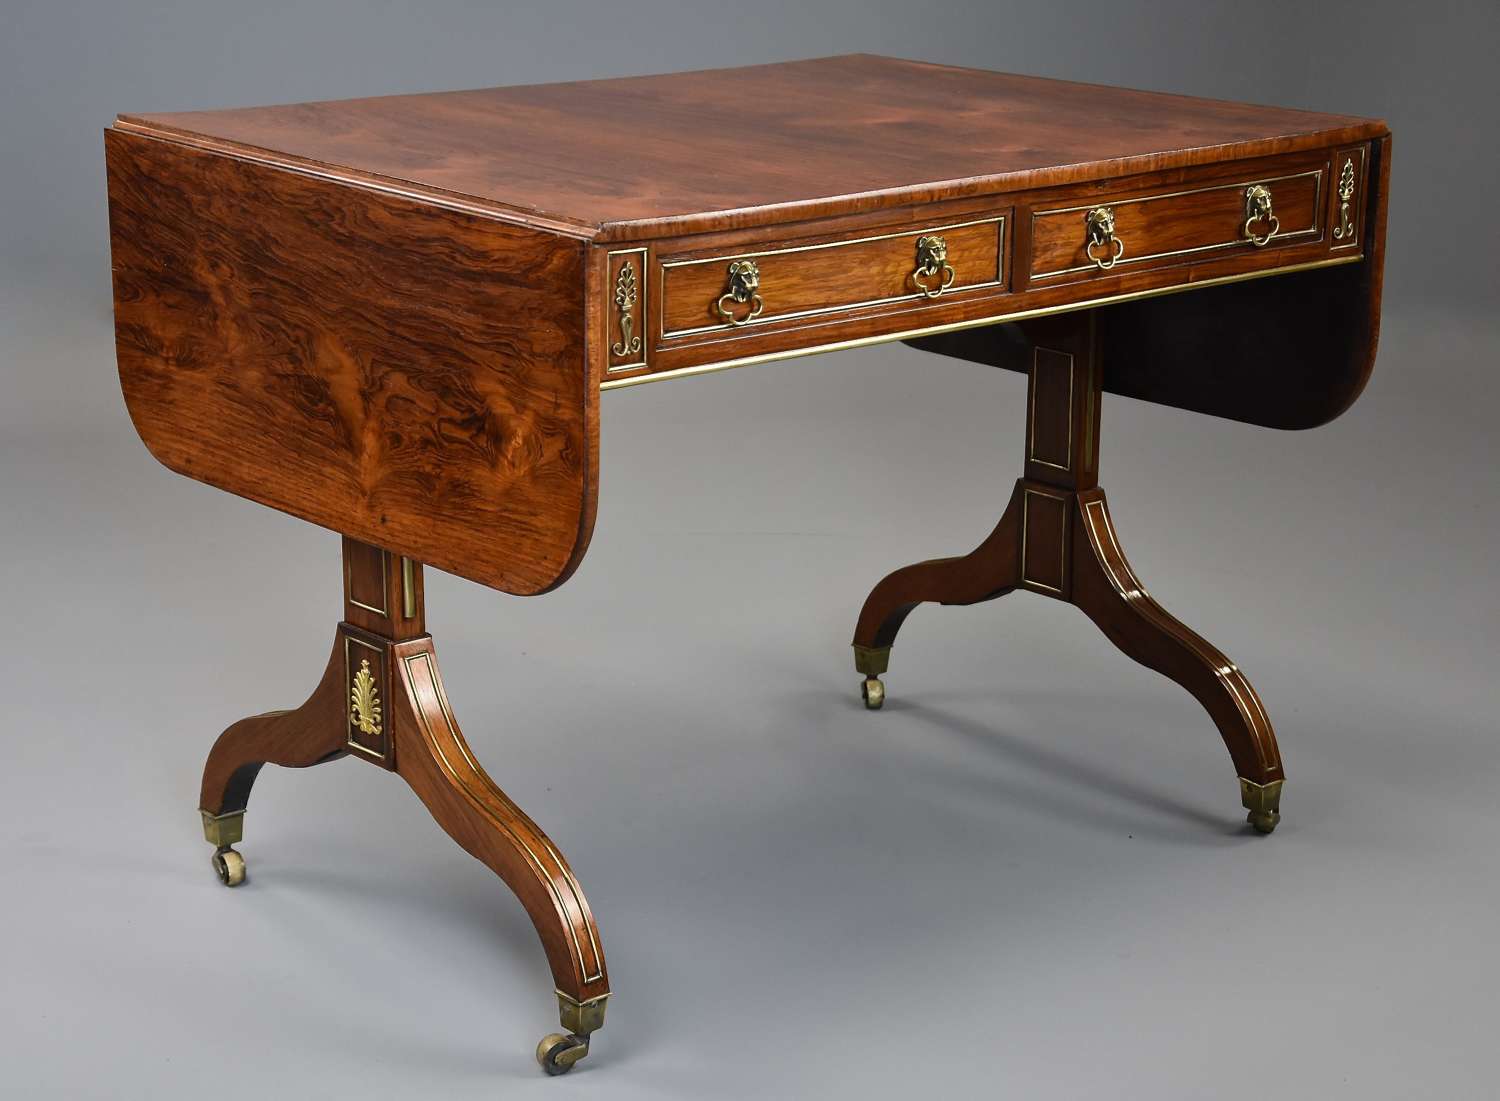 Fine quality English Regency rosewood and brass sofa table